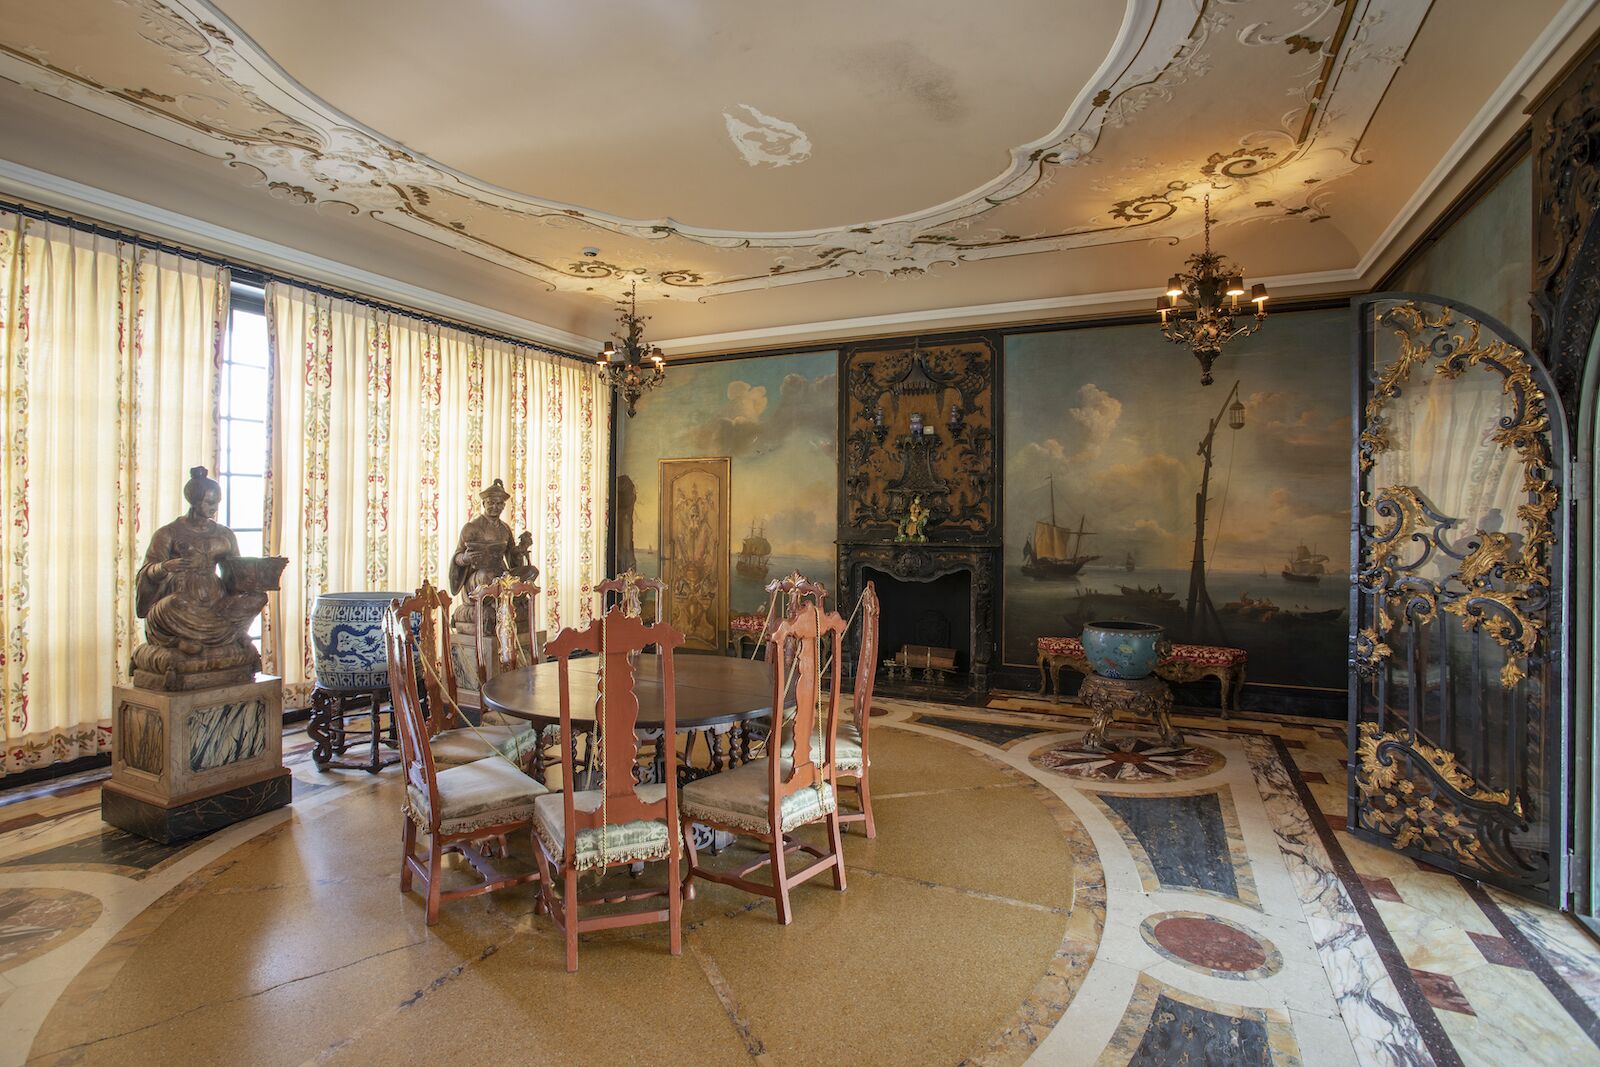 The Breakfast Room, decorated in Asian style, at the Vizcaya Museum and Gardens in Miami